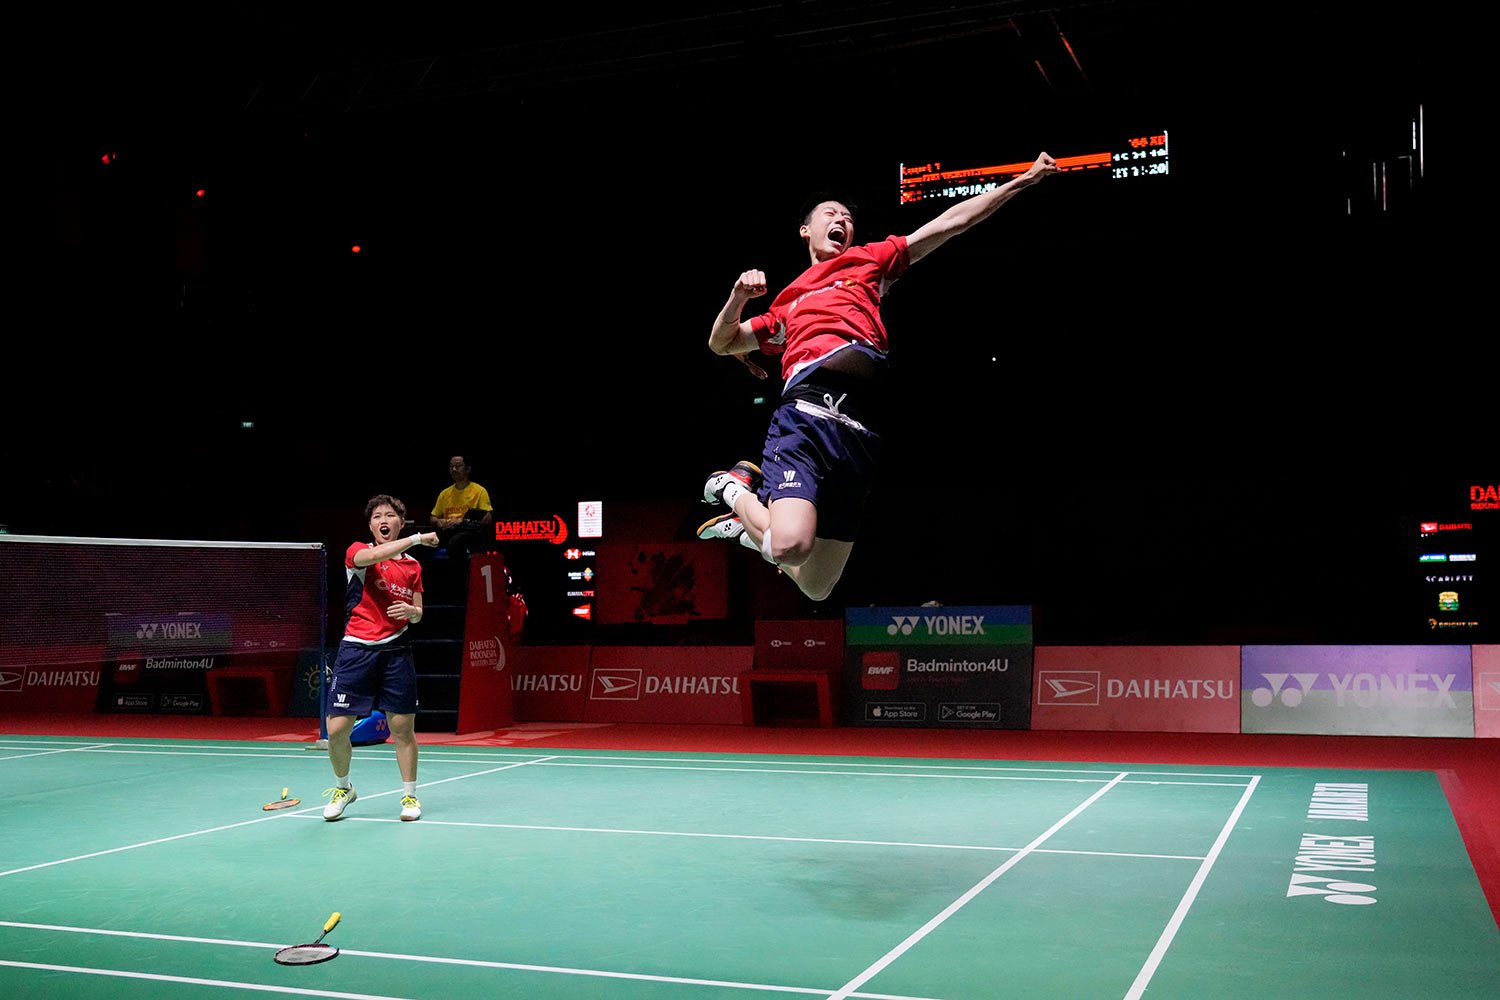  China's Feng Yan Zhe, right, and Huang Dong Ping celebrate after defeating China's Jiang Zhen Bang and Wei Ya Xin during their mixed doubles final match in the Indonesia Masters badminton tournament in Jakarta, Indonesia, Sunday, Jan. 29, 2023. (AP 